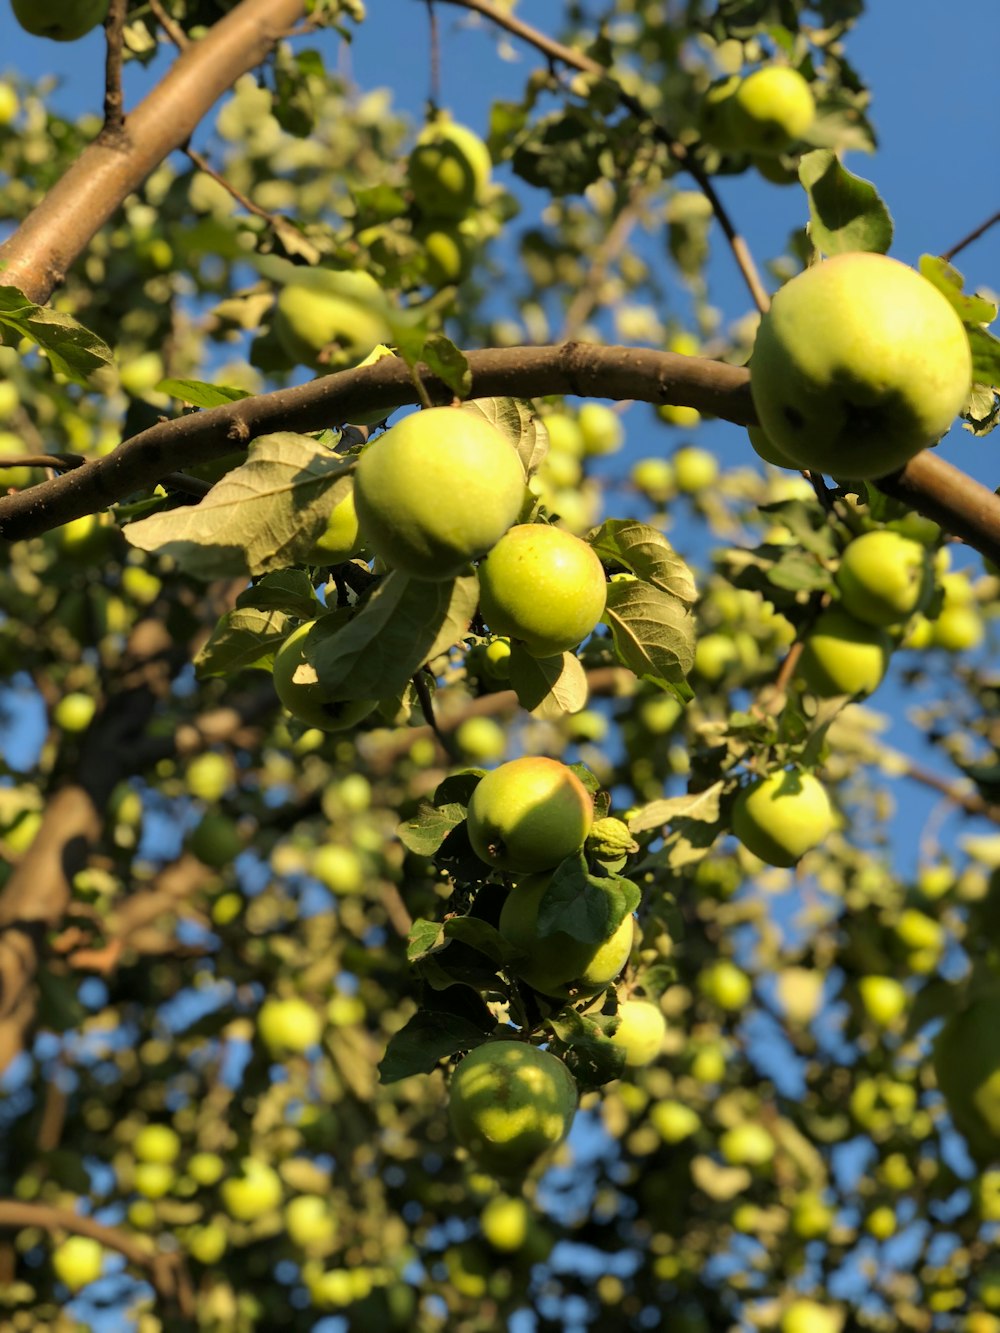 green round fruits on brown tree branch during daytime